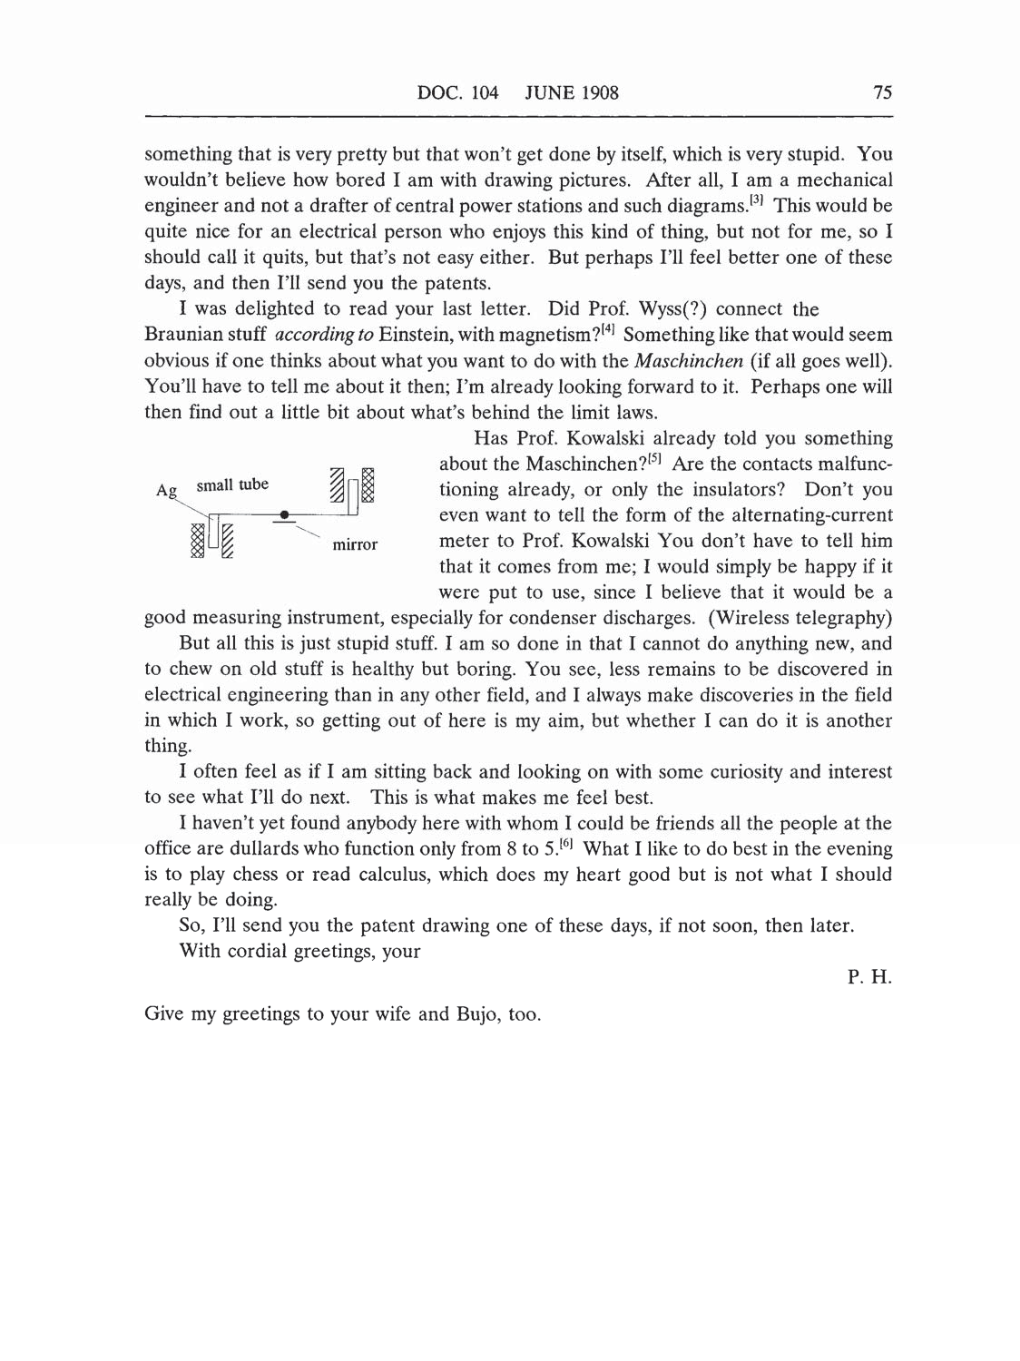 Volume 5: The Swiss Years: Correspondence, 1902-1914 (English translation supplement) page 75